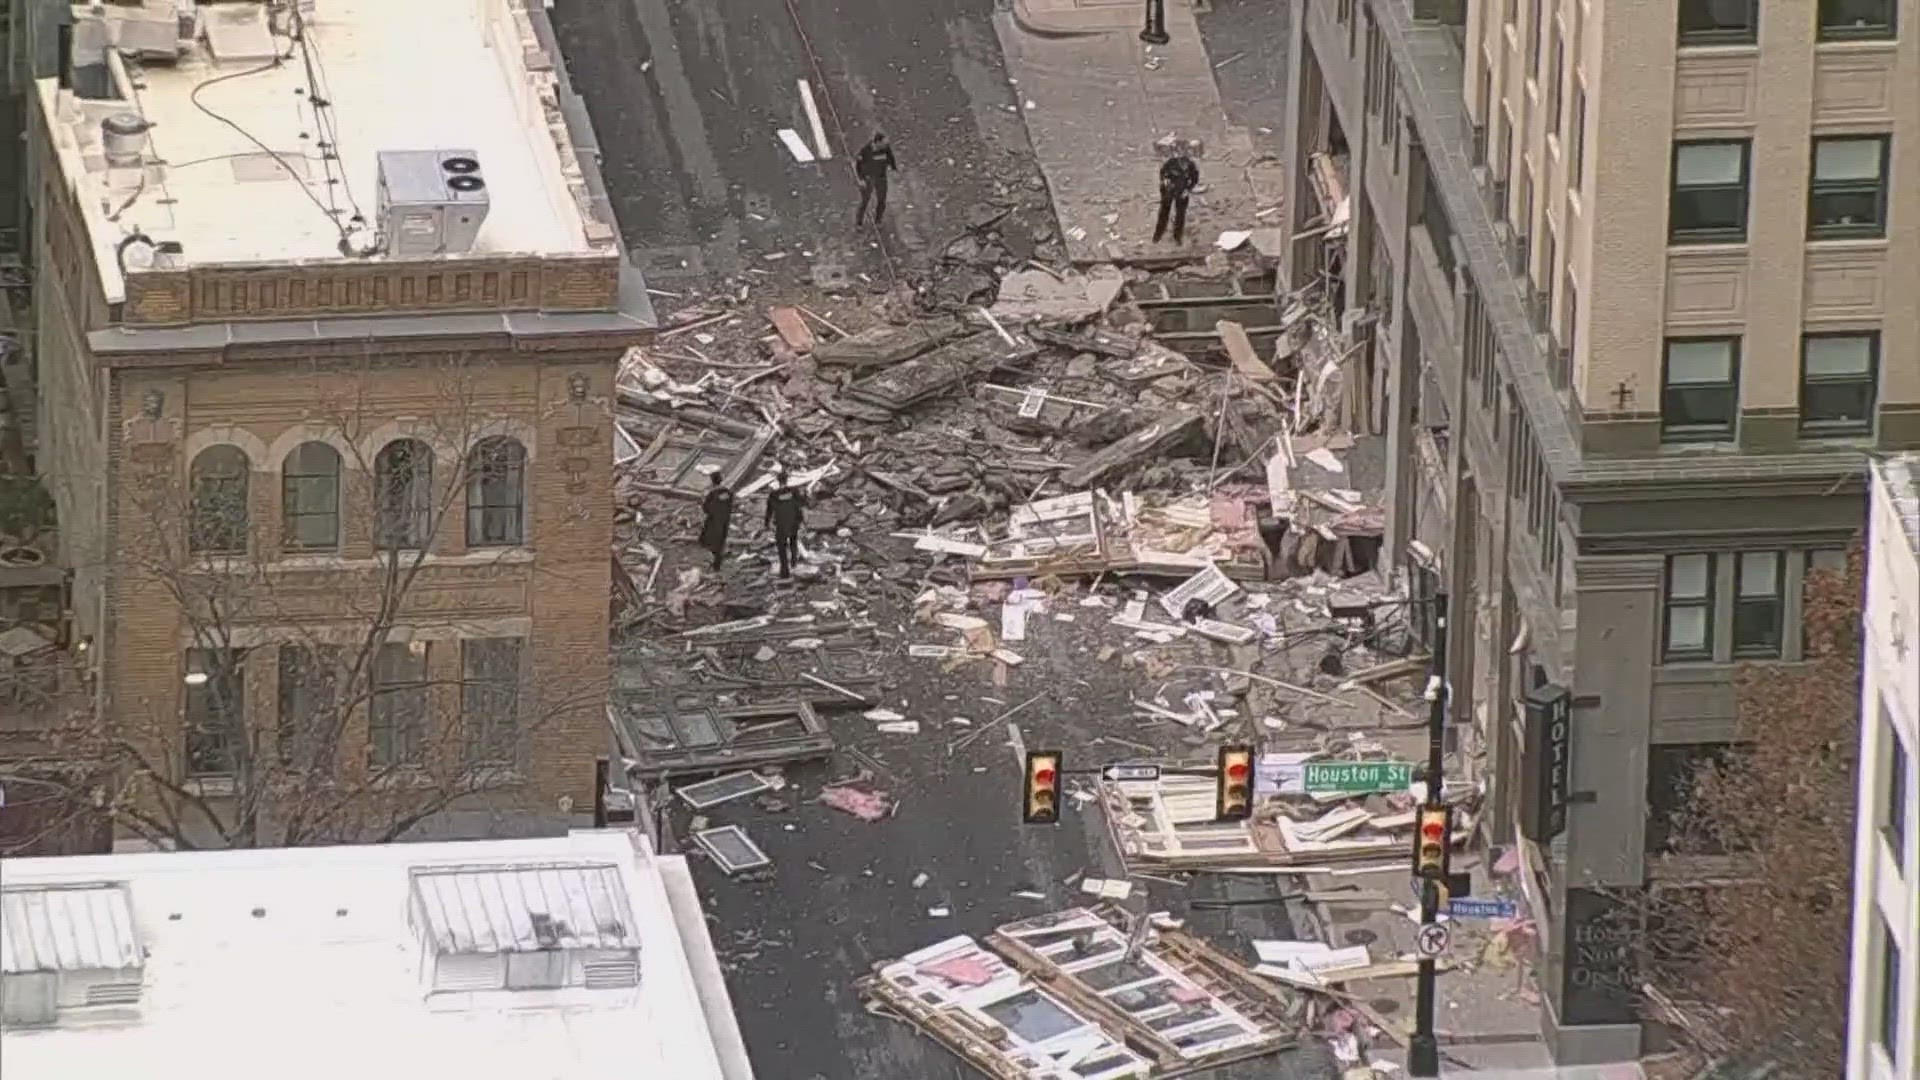 Officials say 21 people have been found injured in the explosion so far.